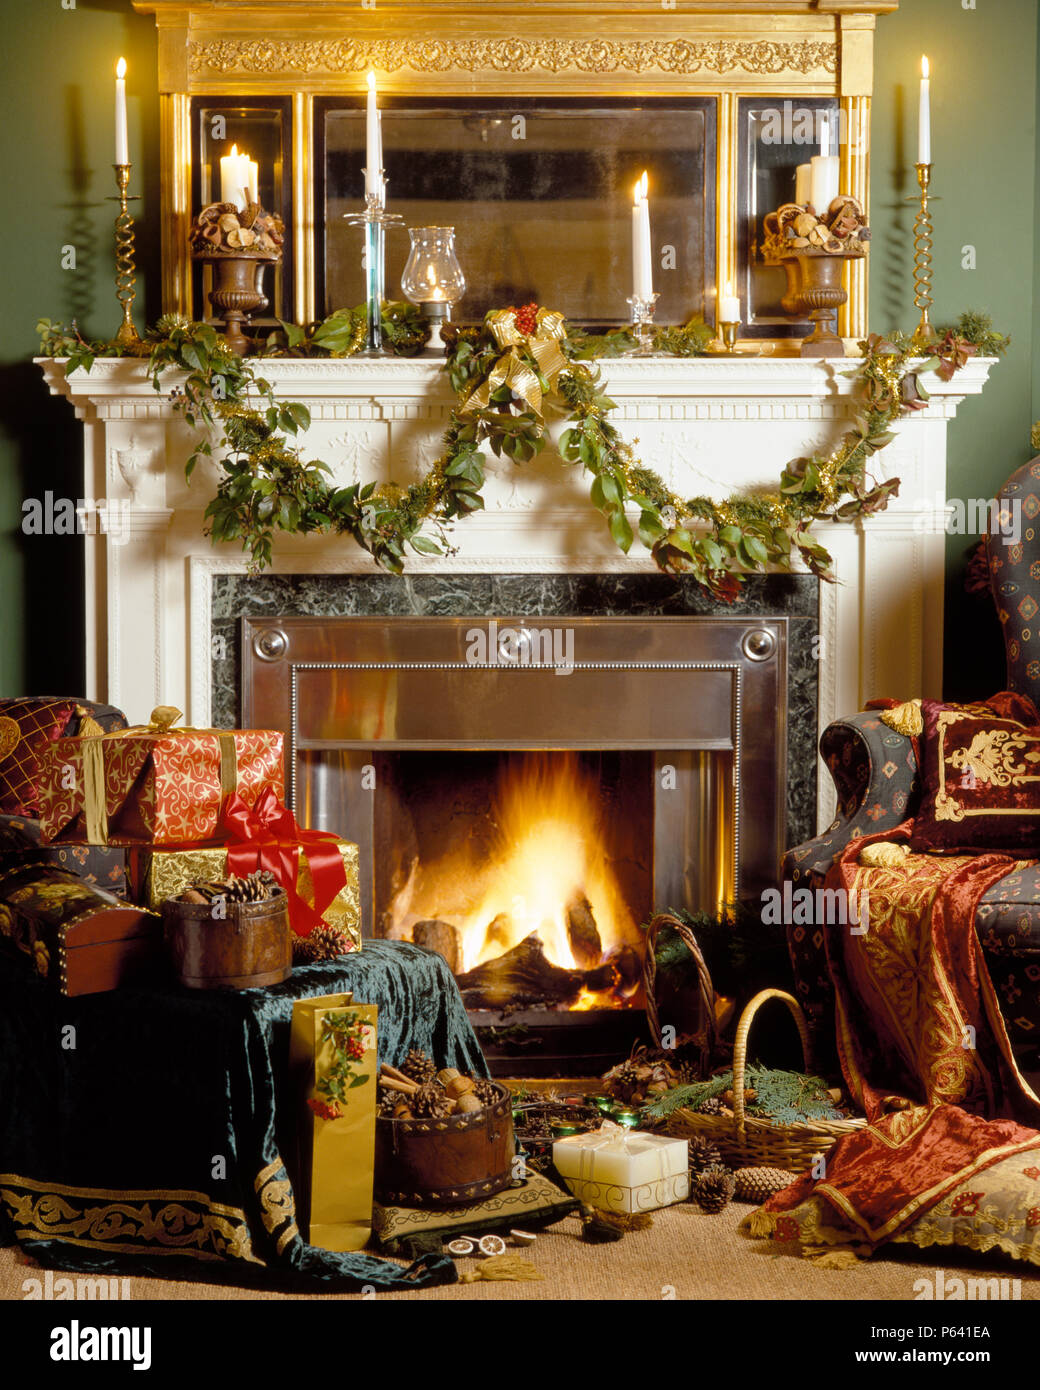 Fireplace with lighted firen and mantlepiece with lighted candles and foliage garland in sitting room with Christmas gifts piled on chair Stock Photo